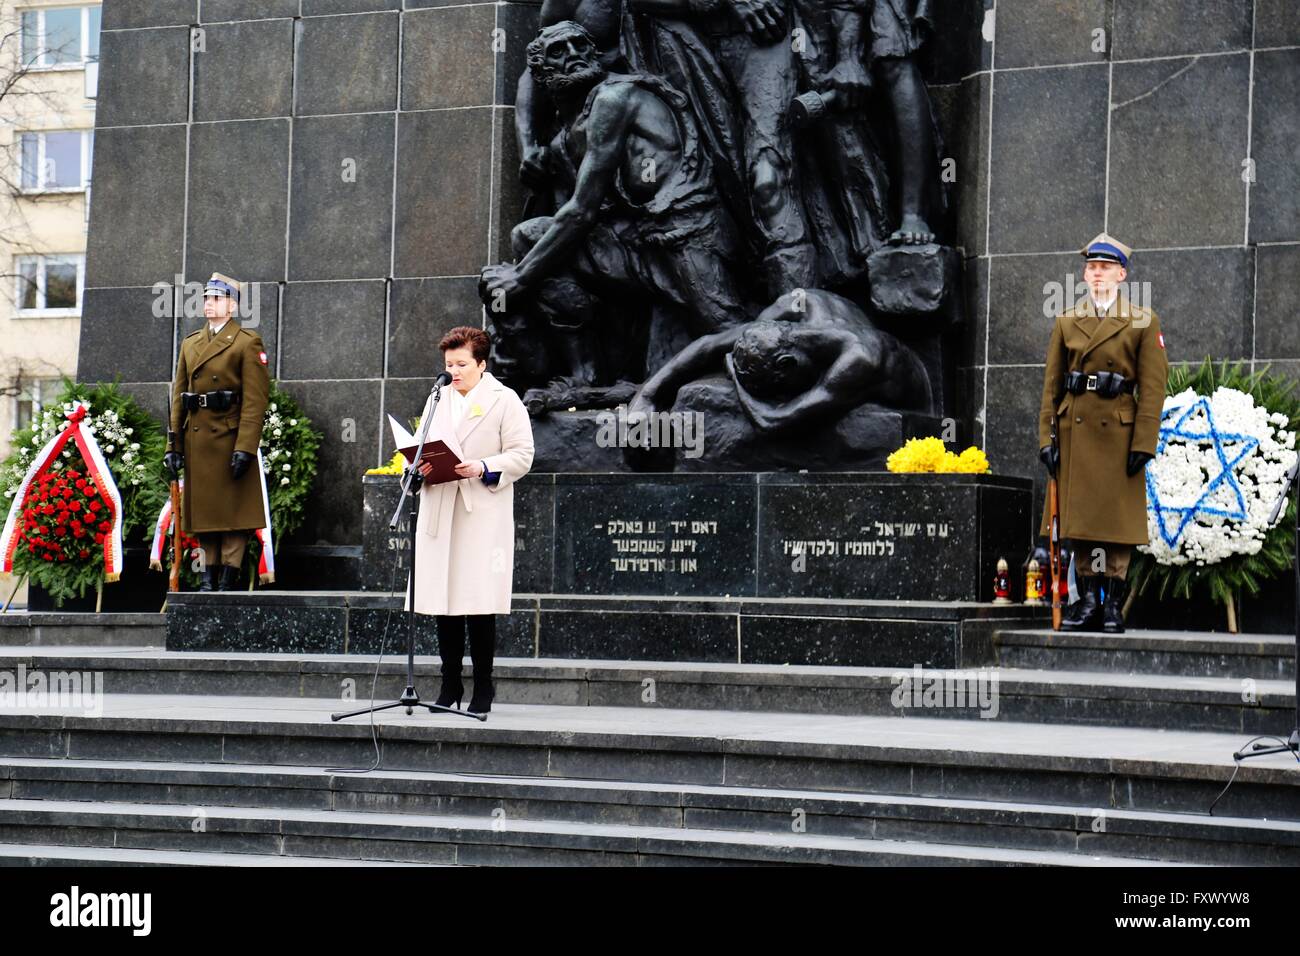 Warsaw, Poland. 19th April, 2016. Warsaw city's Mayor, Hanna Gronkiewicz-Waltz spoke during during the 73rd anniversary of the Warsaw Ghetto Uprising in front of the Ghetto Heroes Monument in Warsaw, Poland. Various representatives including Polish-Jewish organizations, members of the state and local governments, ambassadors, as well as those who are "Righteous Among Nations" attended the anniversary. Credit:  PACIFIC PRESS/Alamy Live News Stock Photo